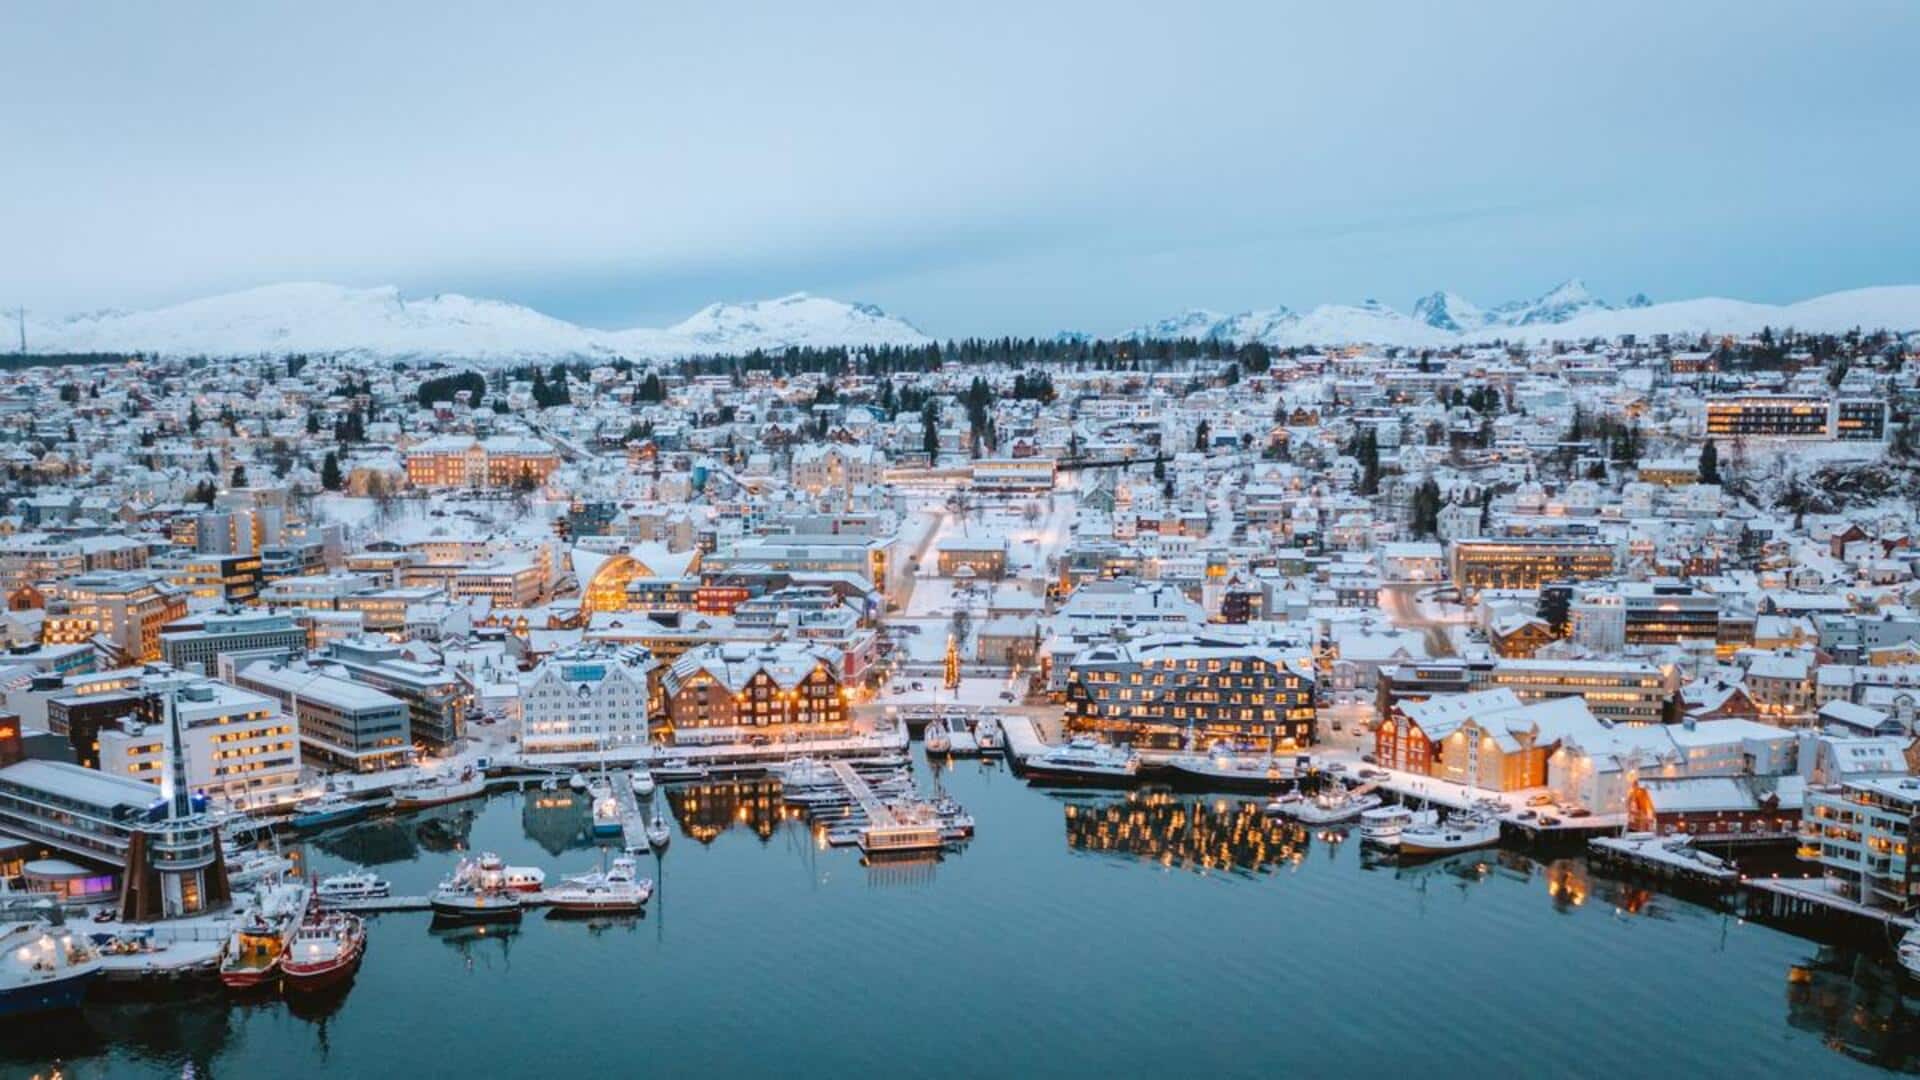 Explore Tromso, Norway's winter wonderland with this travel guide